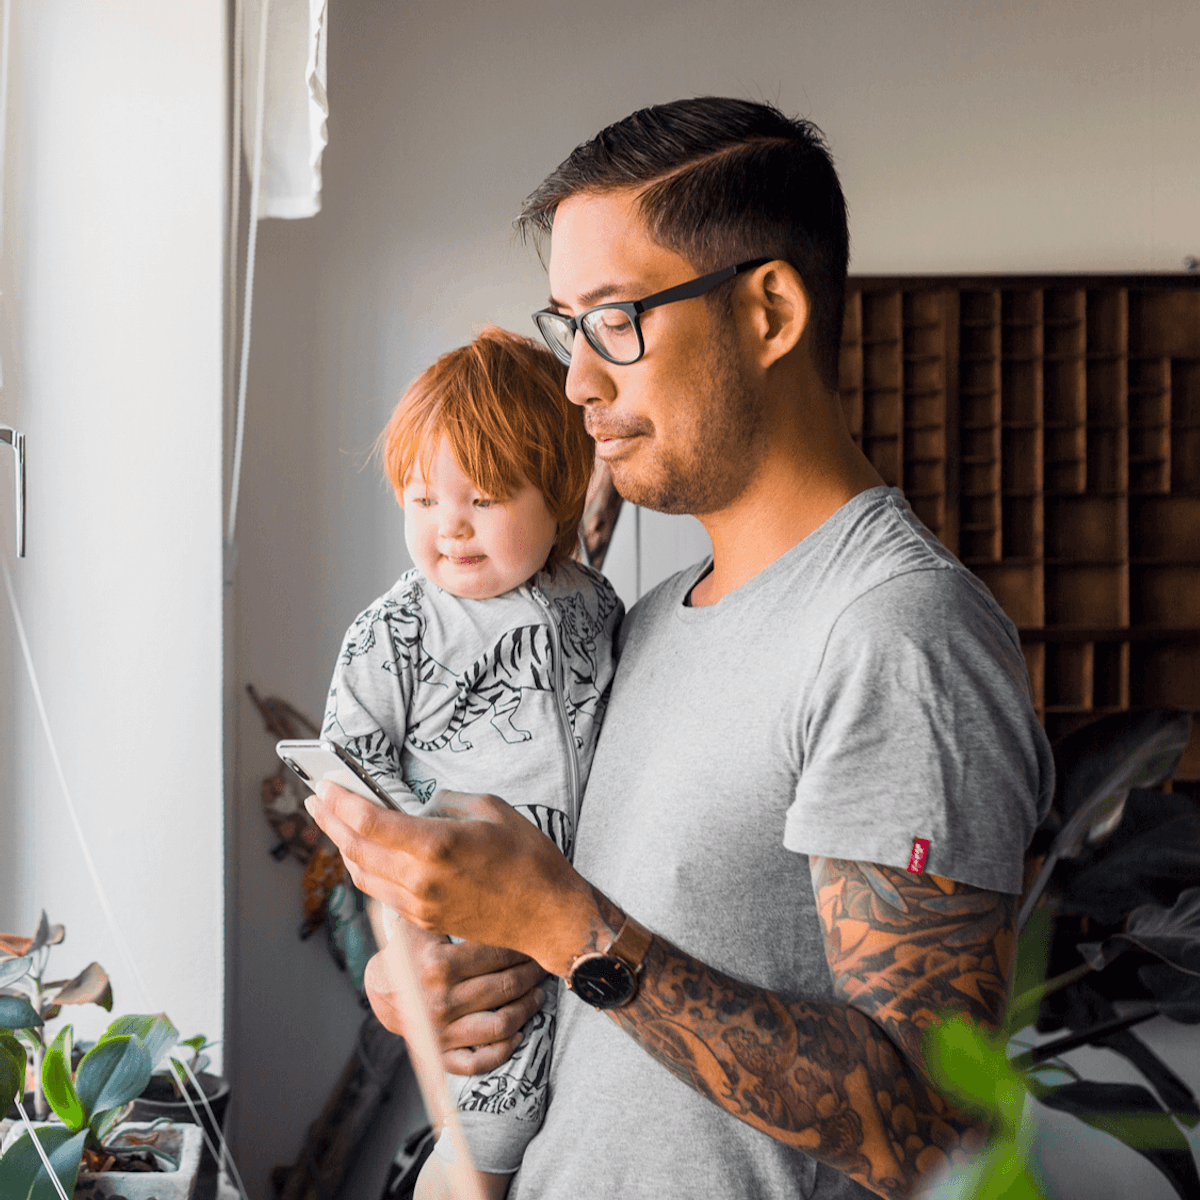 Dad and son by window looking at phone